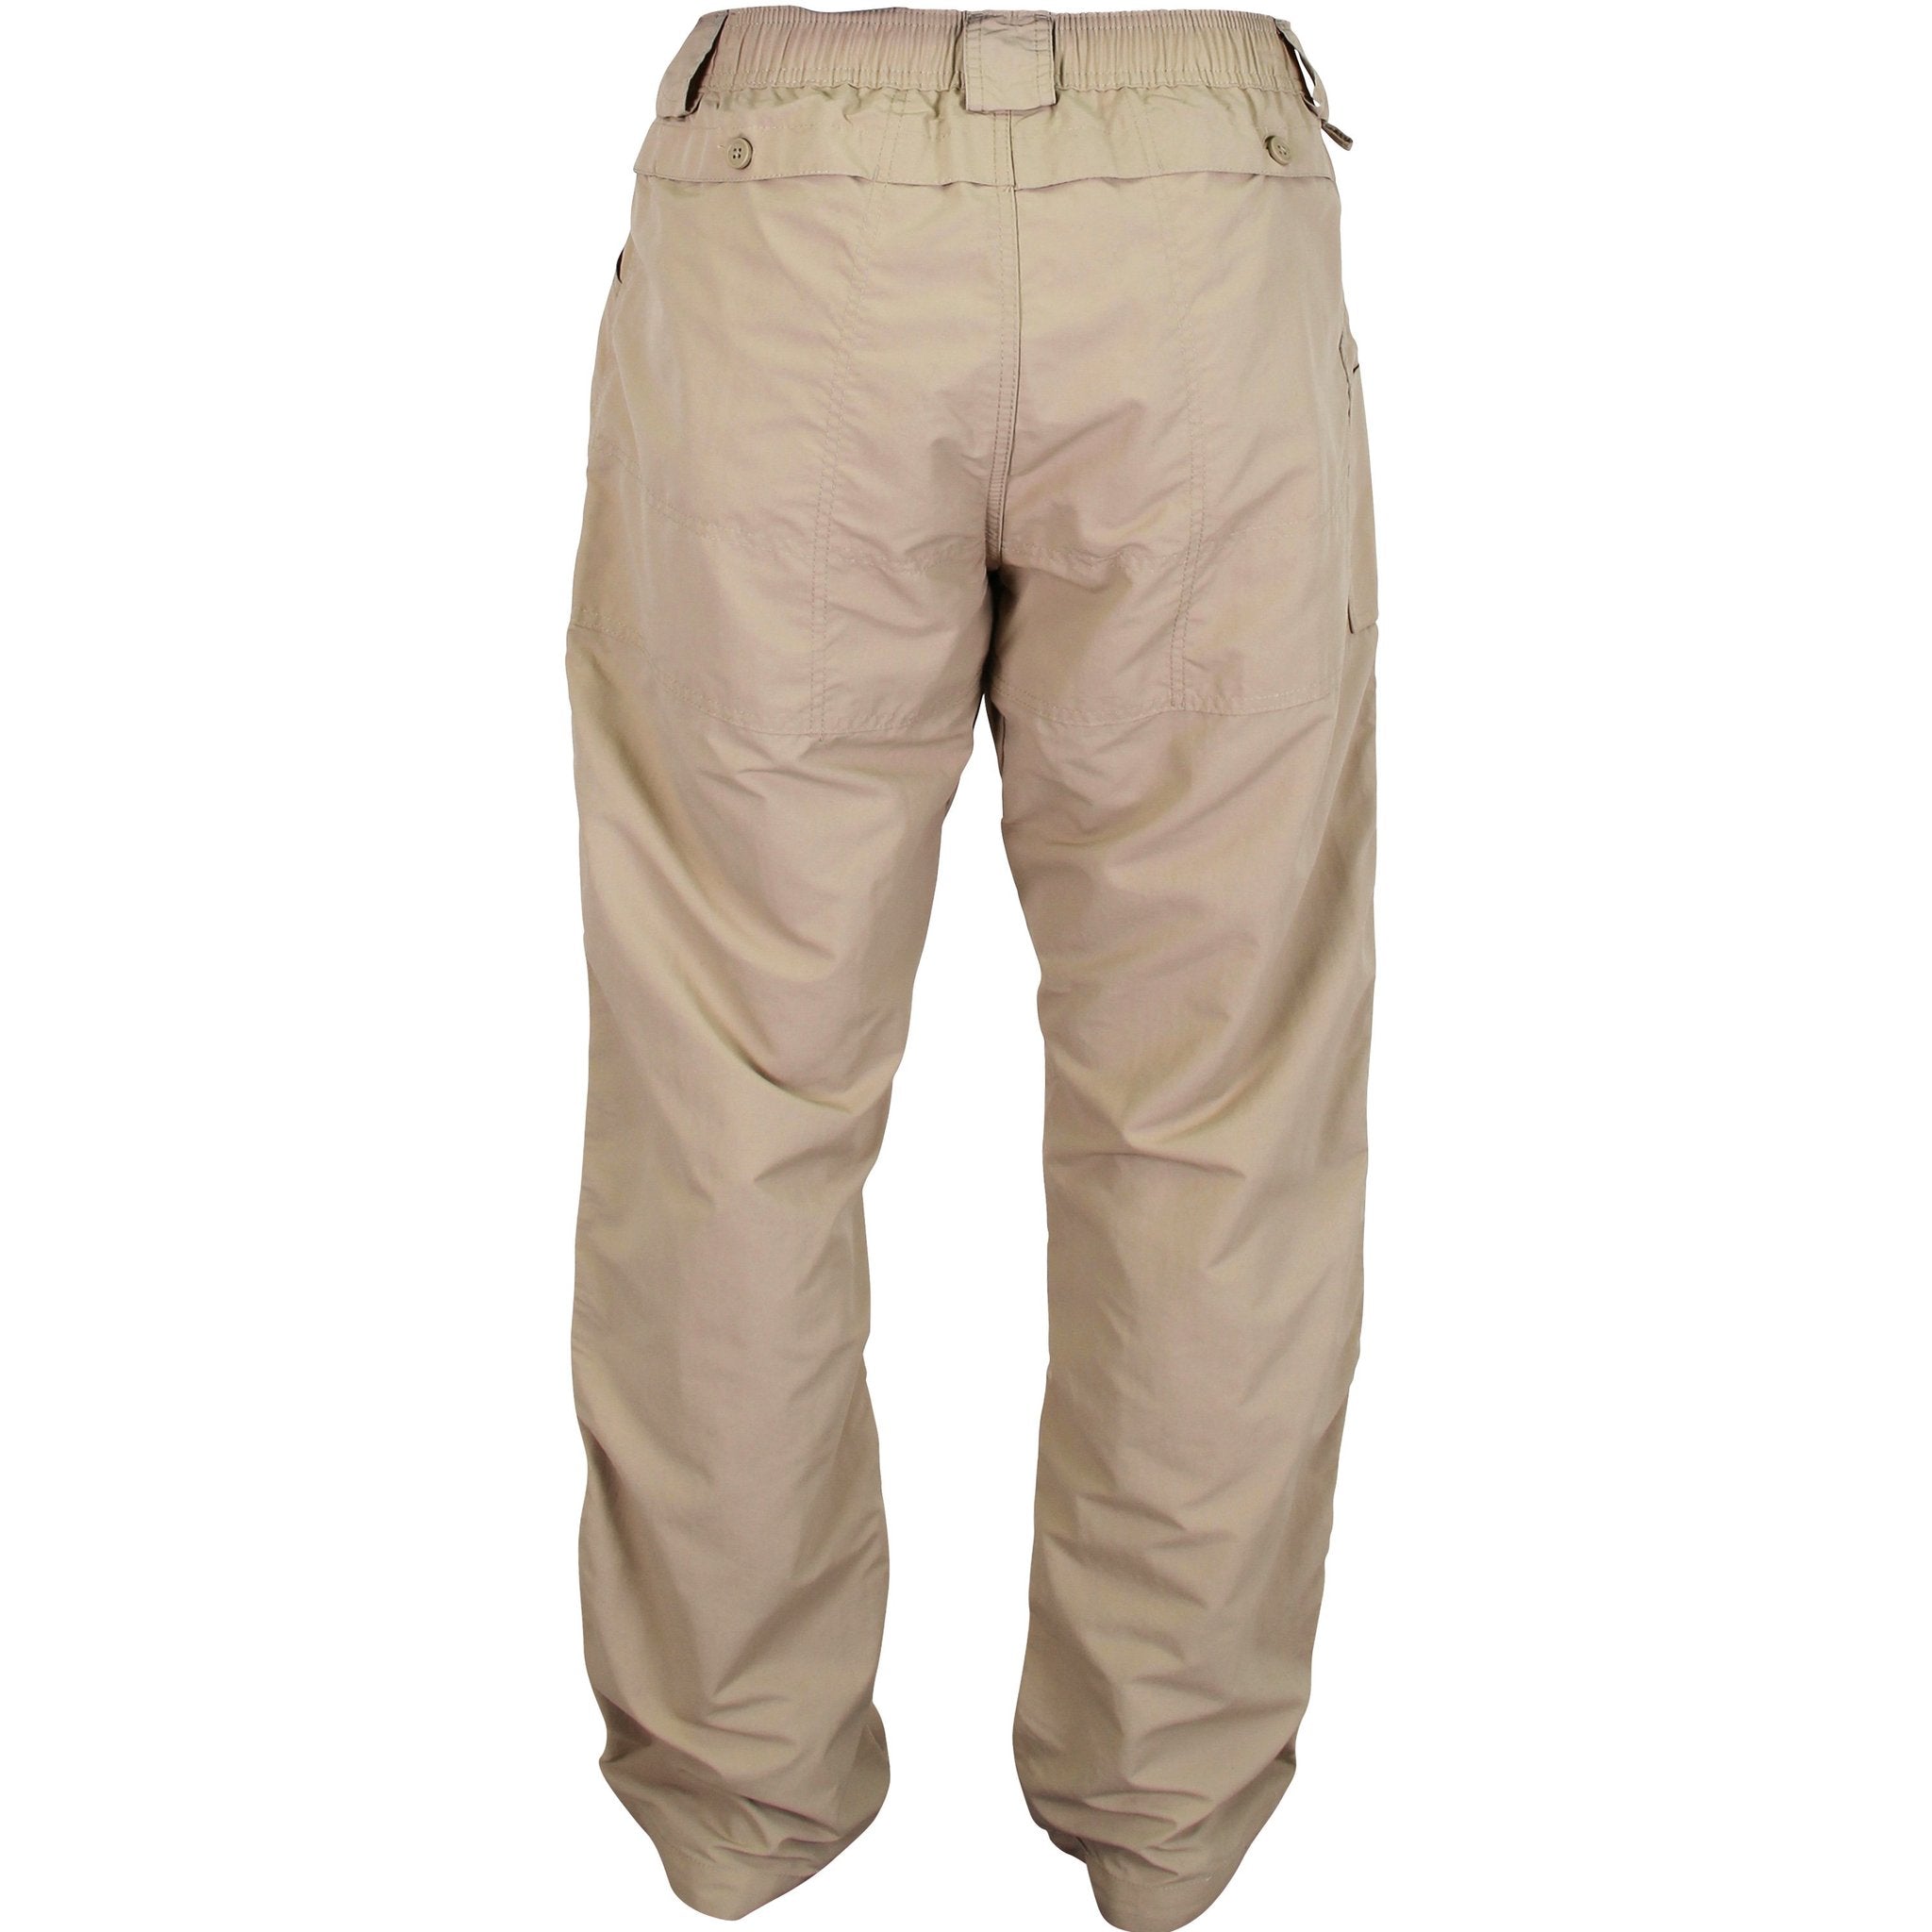 AFTCO Bluewater Men's Honcho Utility Pant Size 34 - Sand | Eagle Eye Outfitters